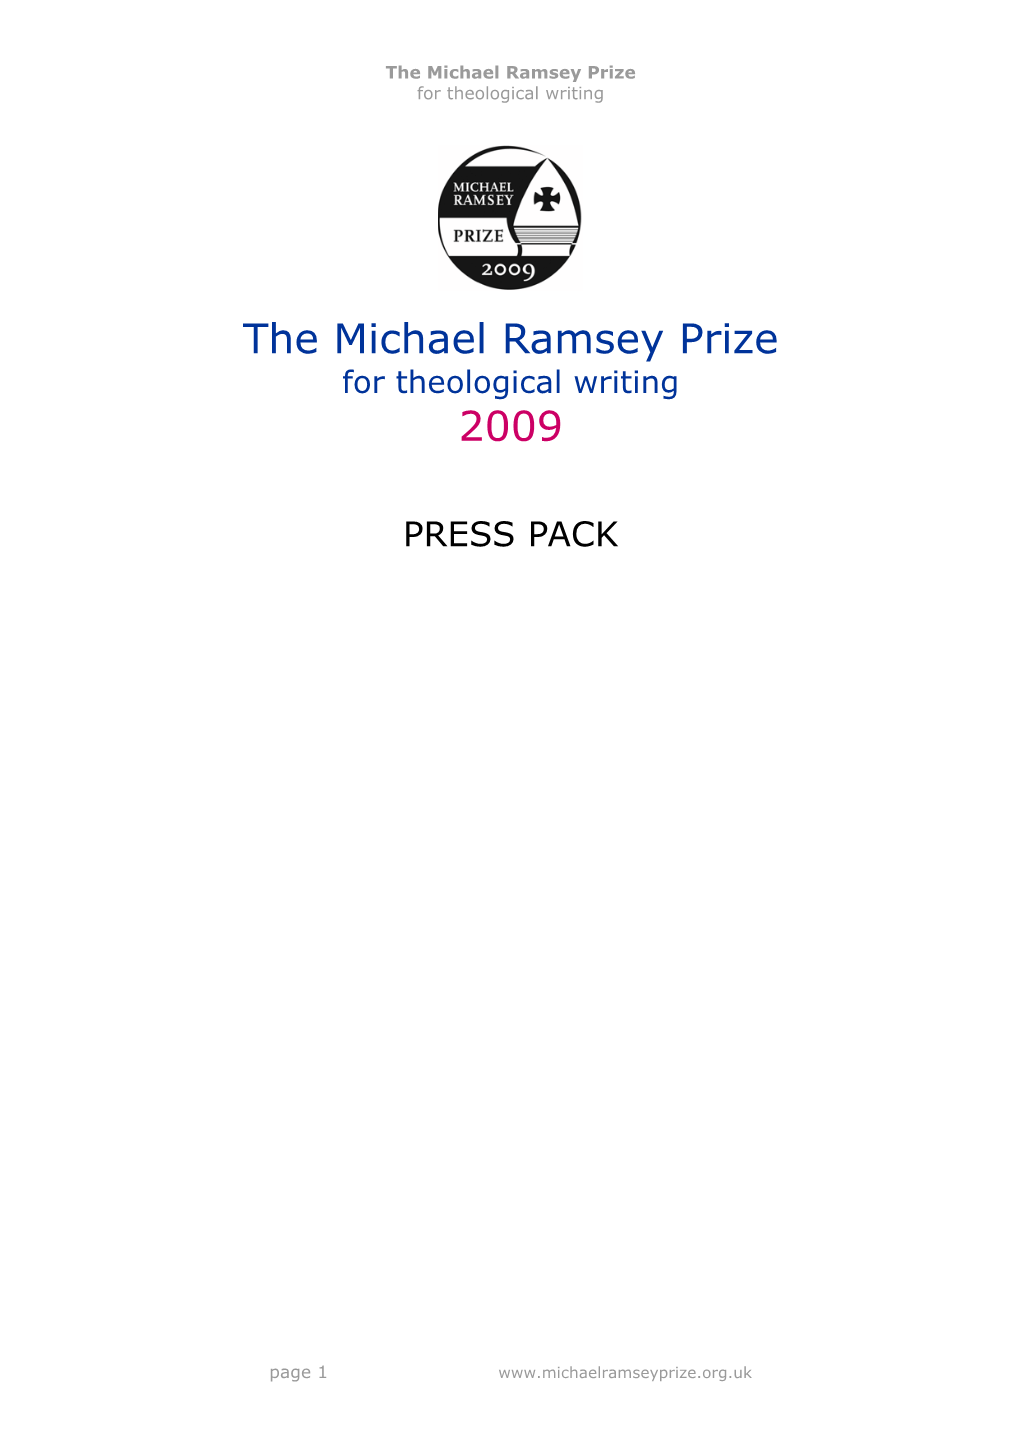 The Michael Ramsey Prize 2009